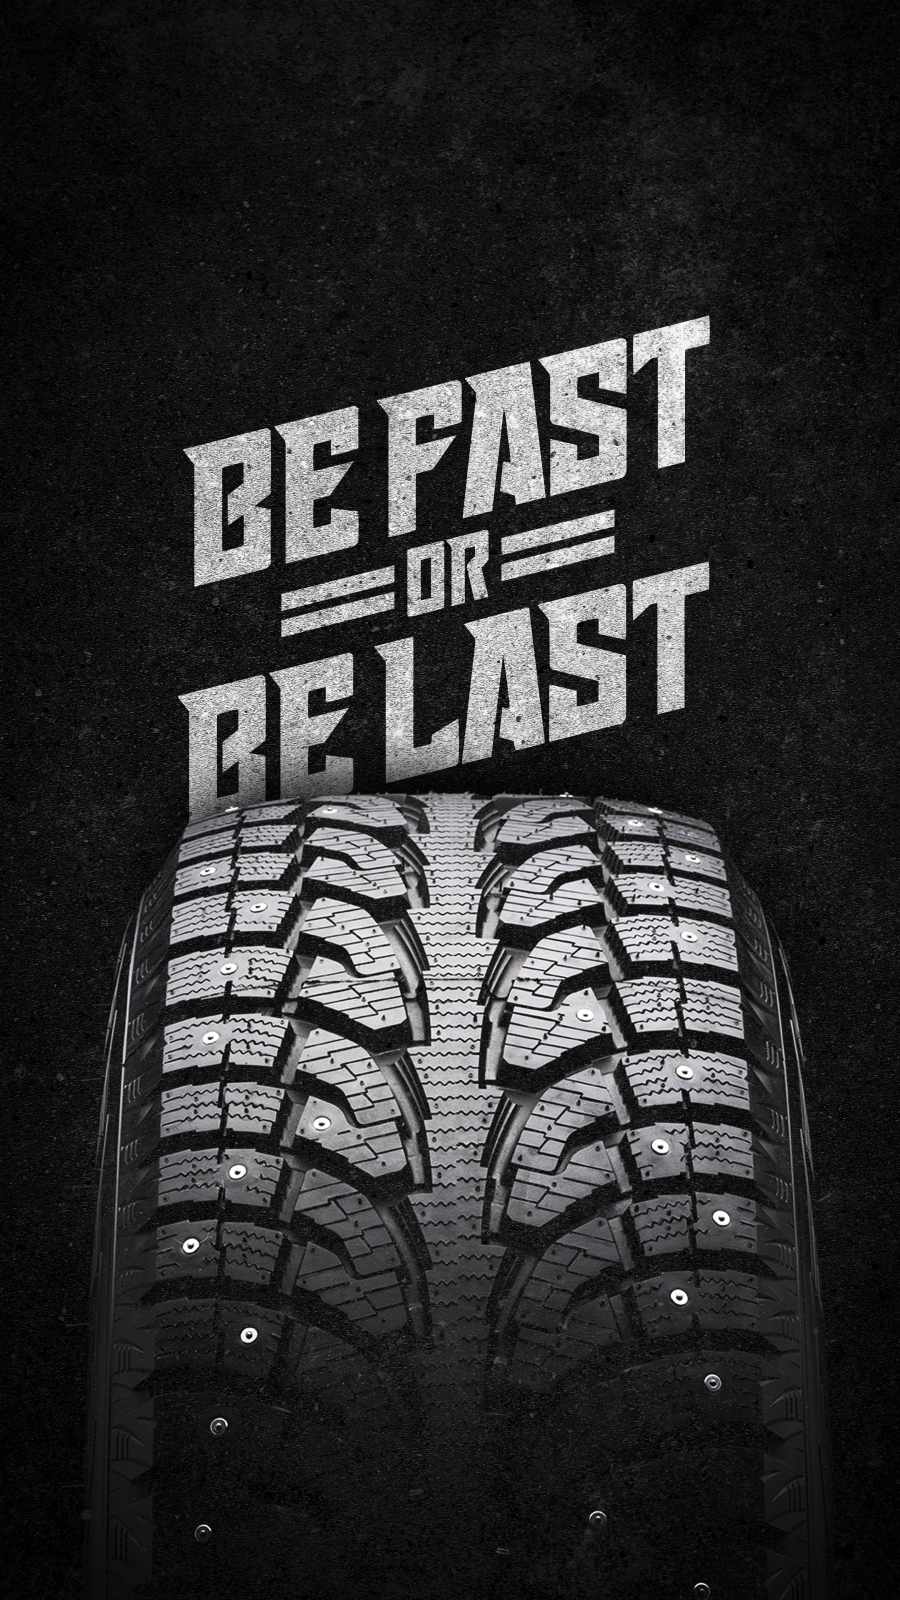 Be Fast or Be Last